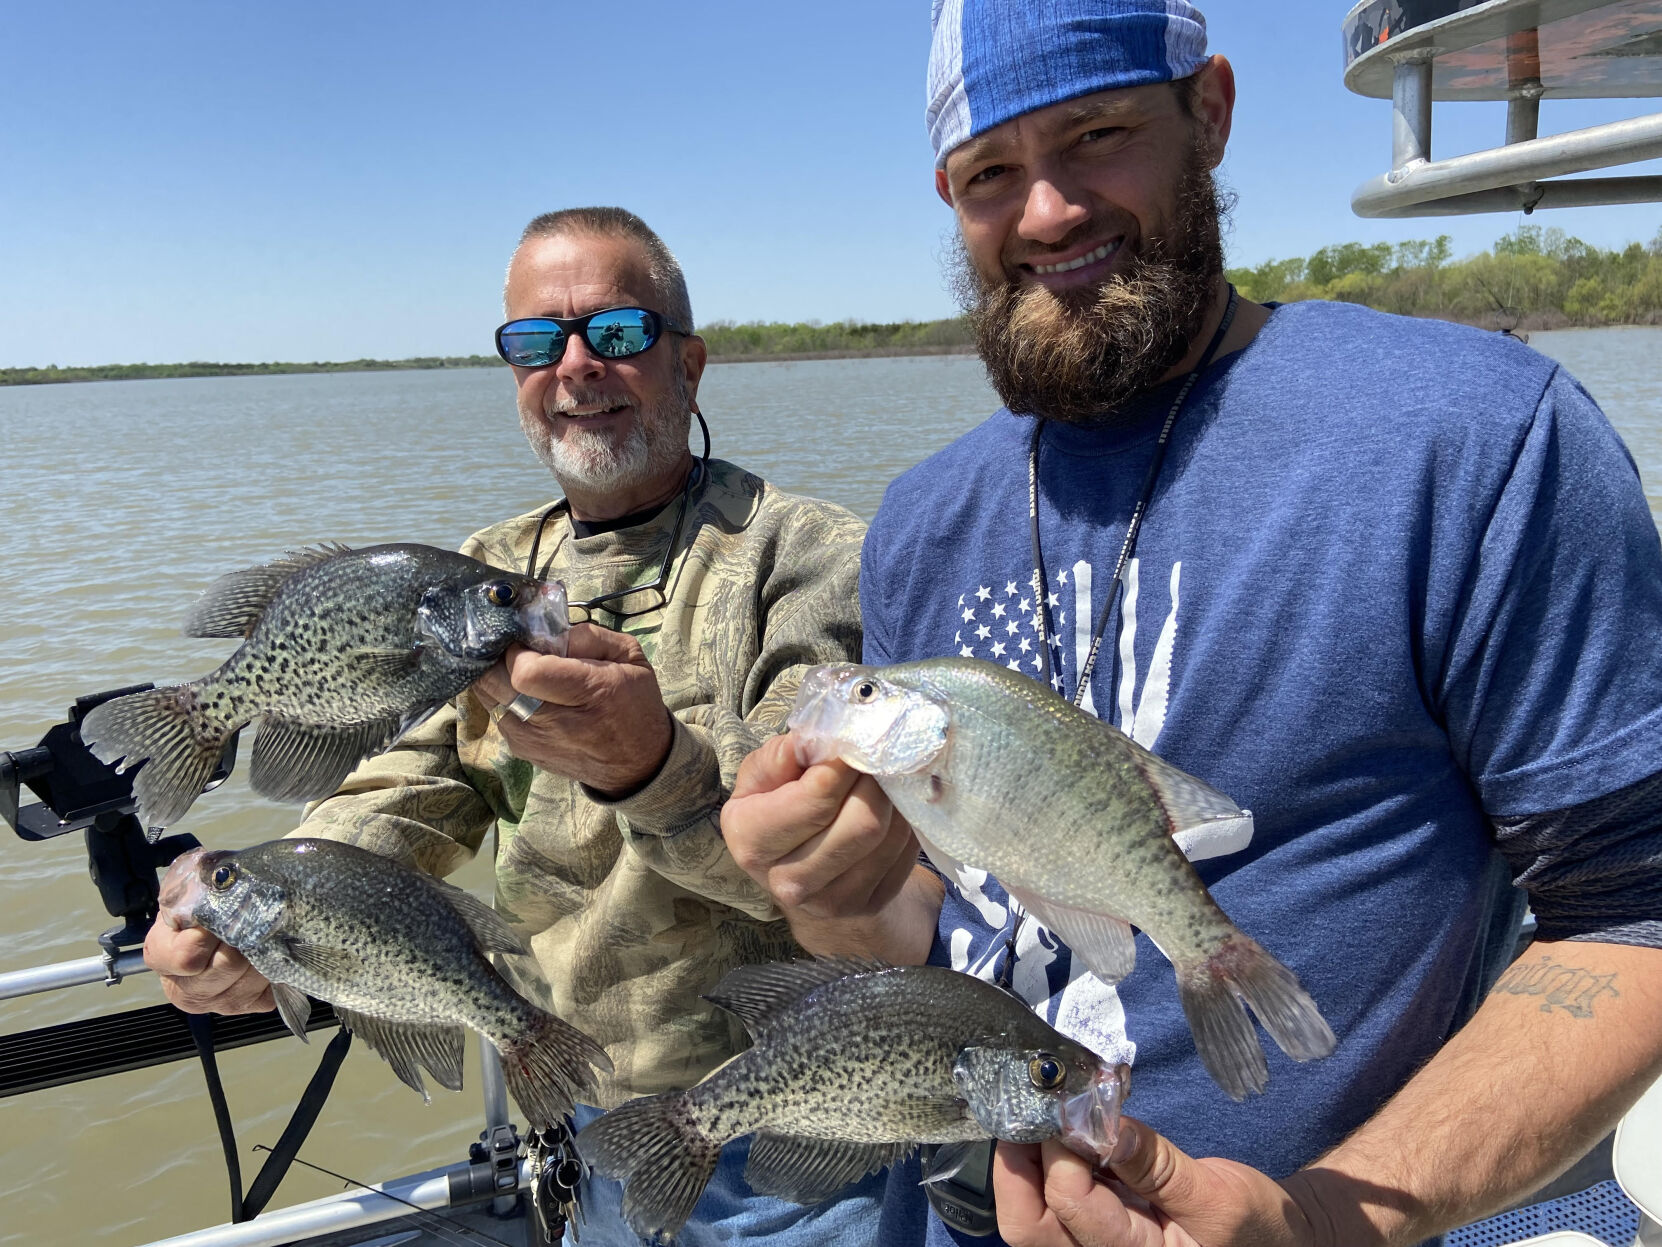 OUTDOORS Lake Lavon crappie trip with the pros News athensreview